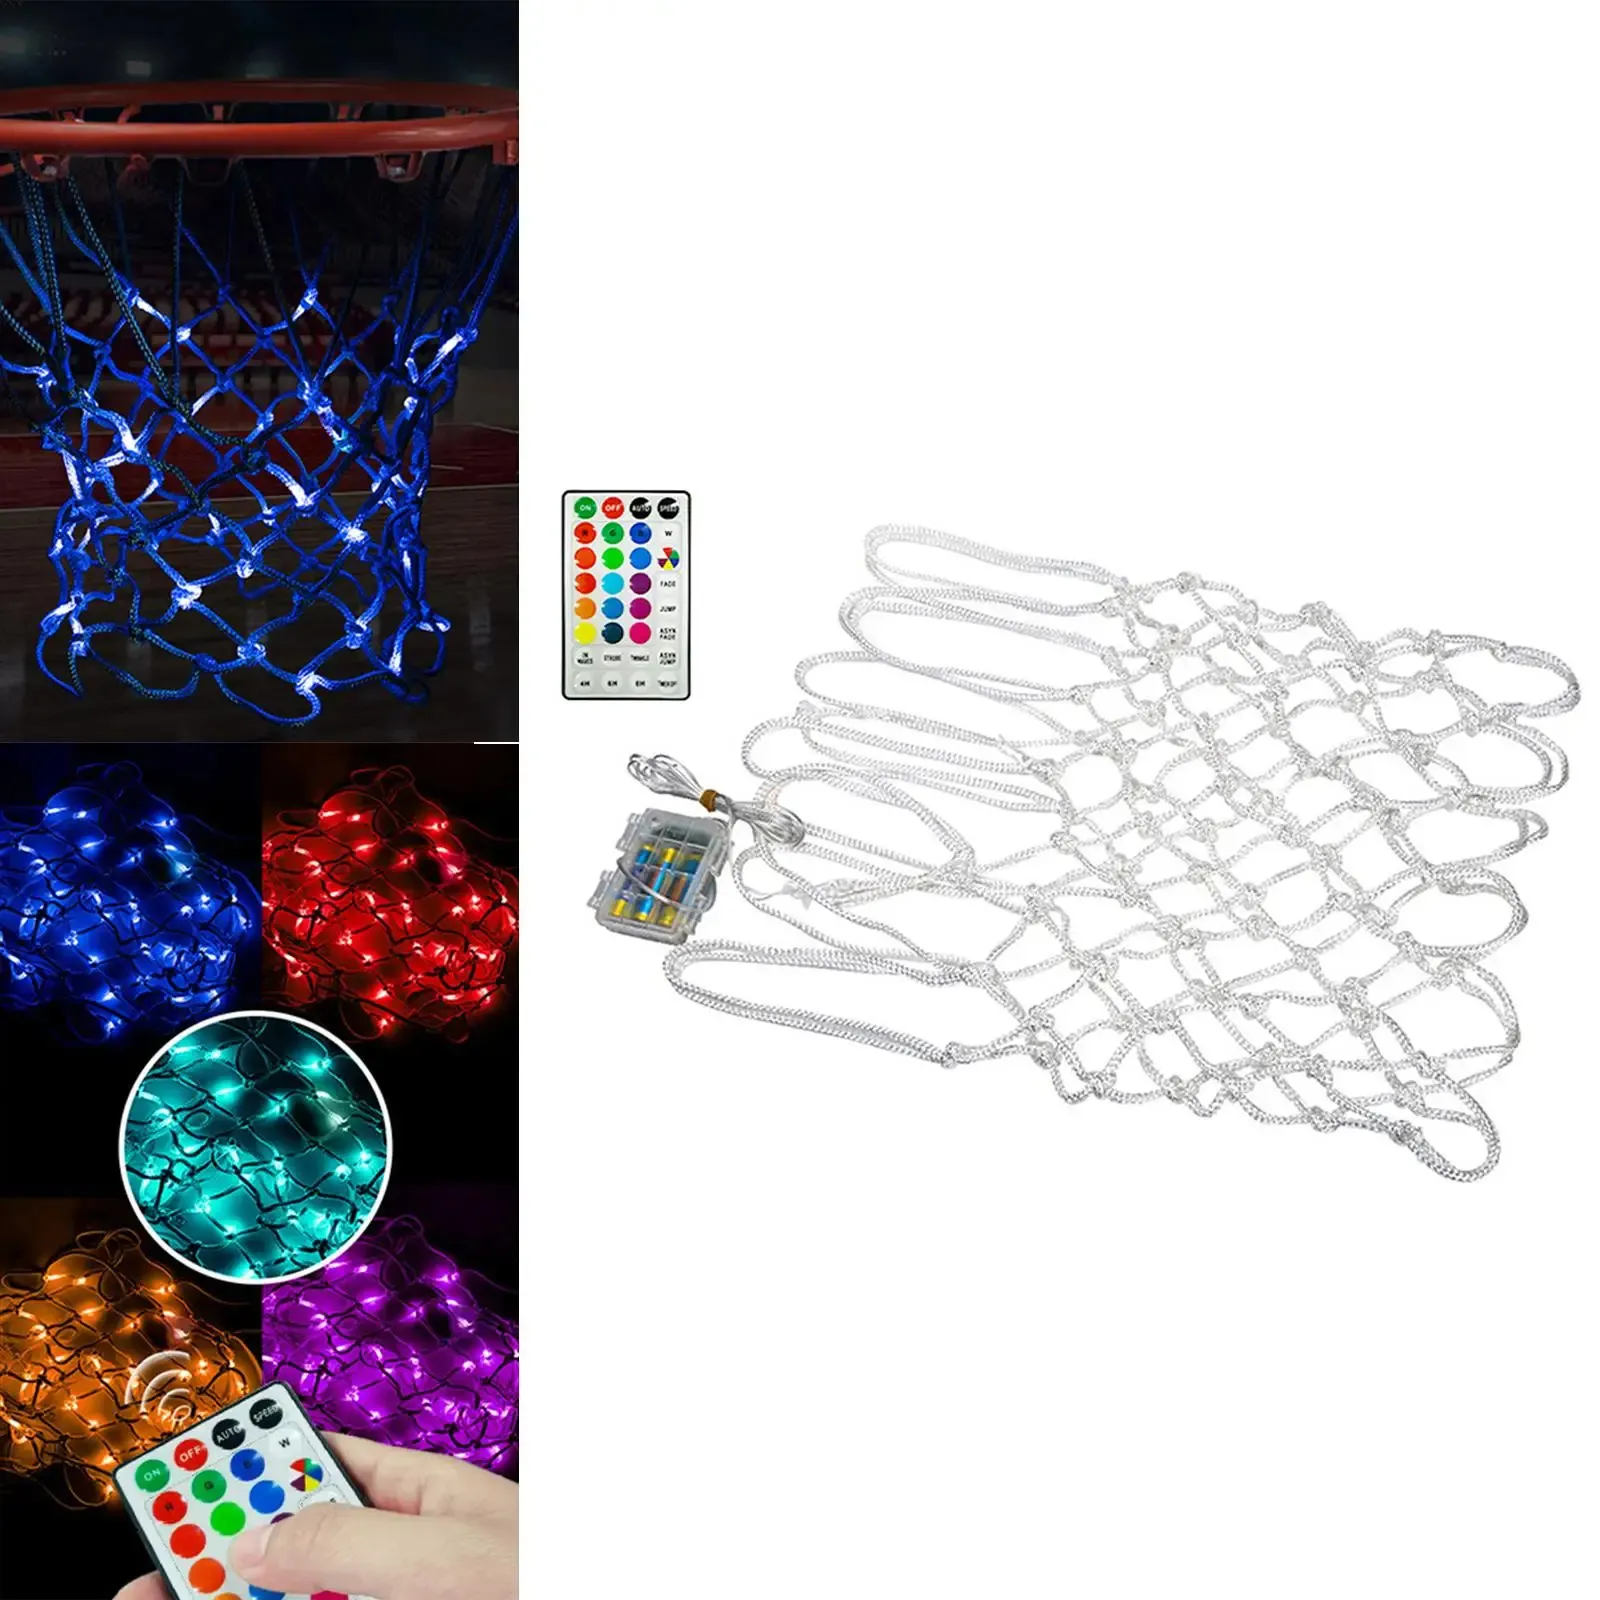 LED Light Basketball Net Change Play Automatic Lights for Outdoor Teen